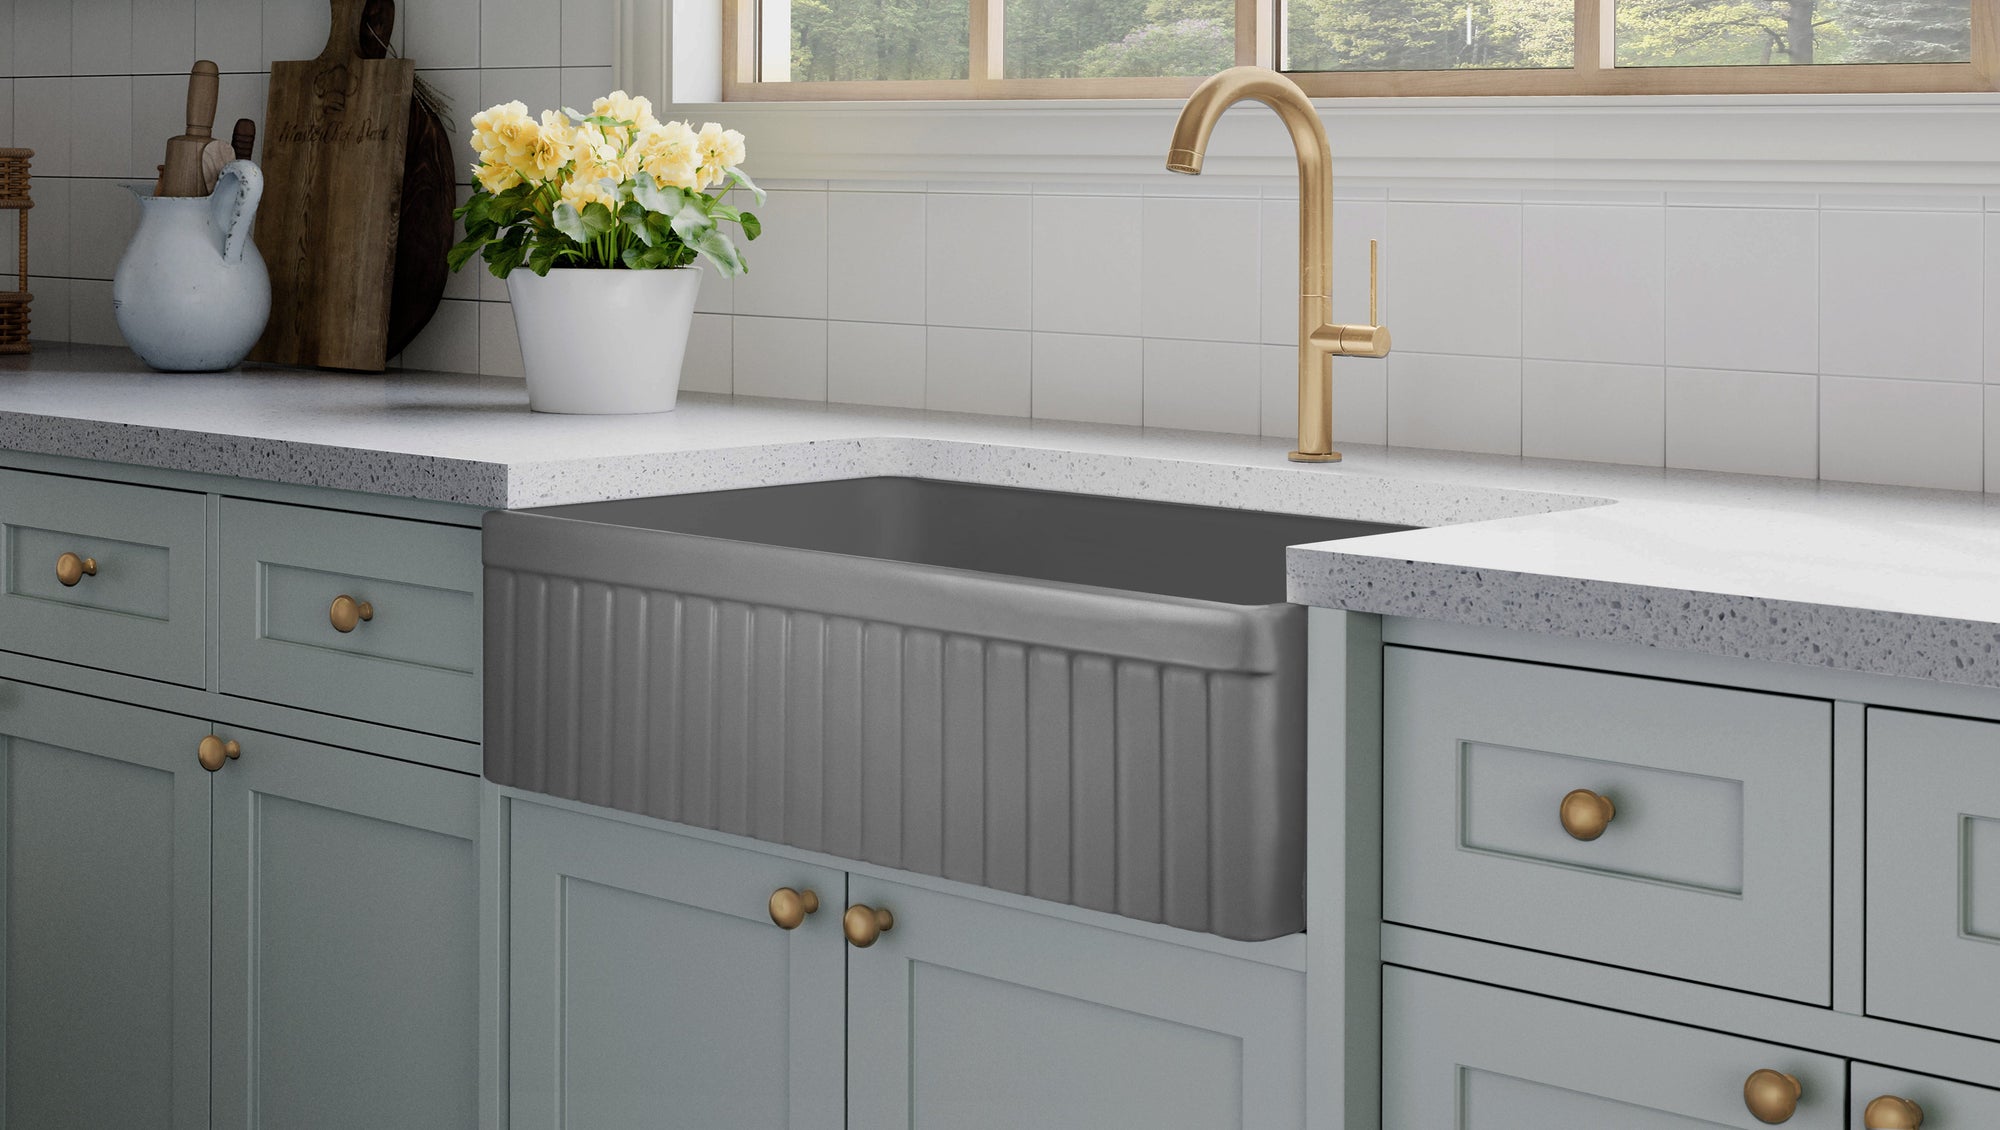 FSW1047BB LUXURY 33-INCH SOLID FIRECLAY FARMHOUSE SINK, MATTE GRAY, MATTE GOLD ACCS, FLUTED FRONT